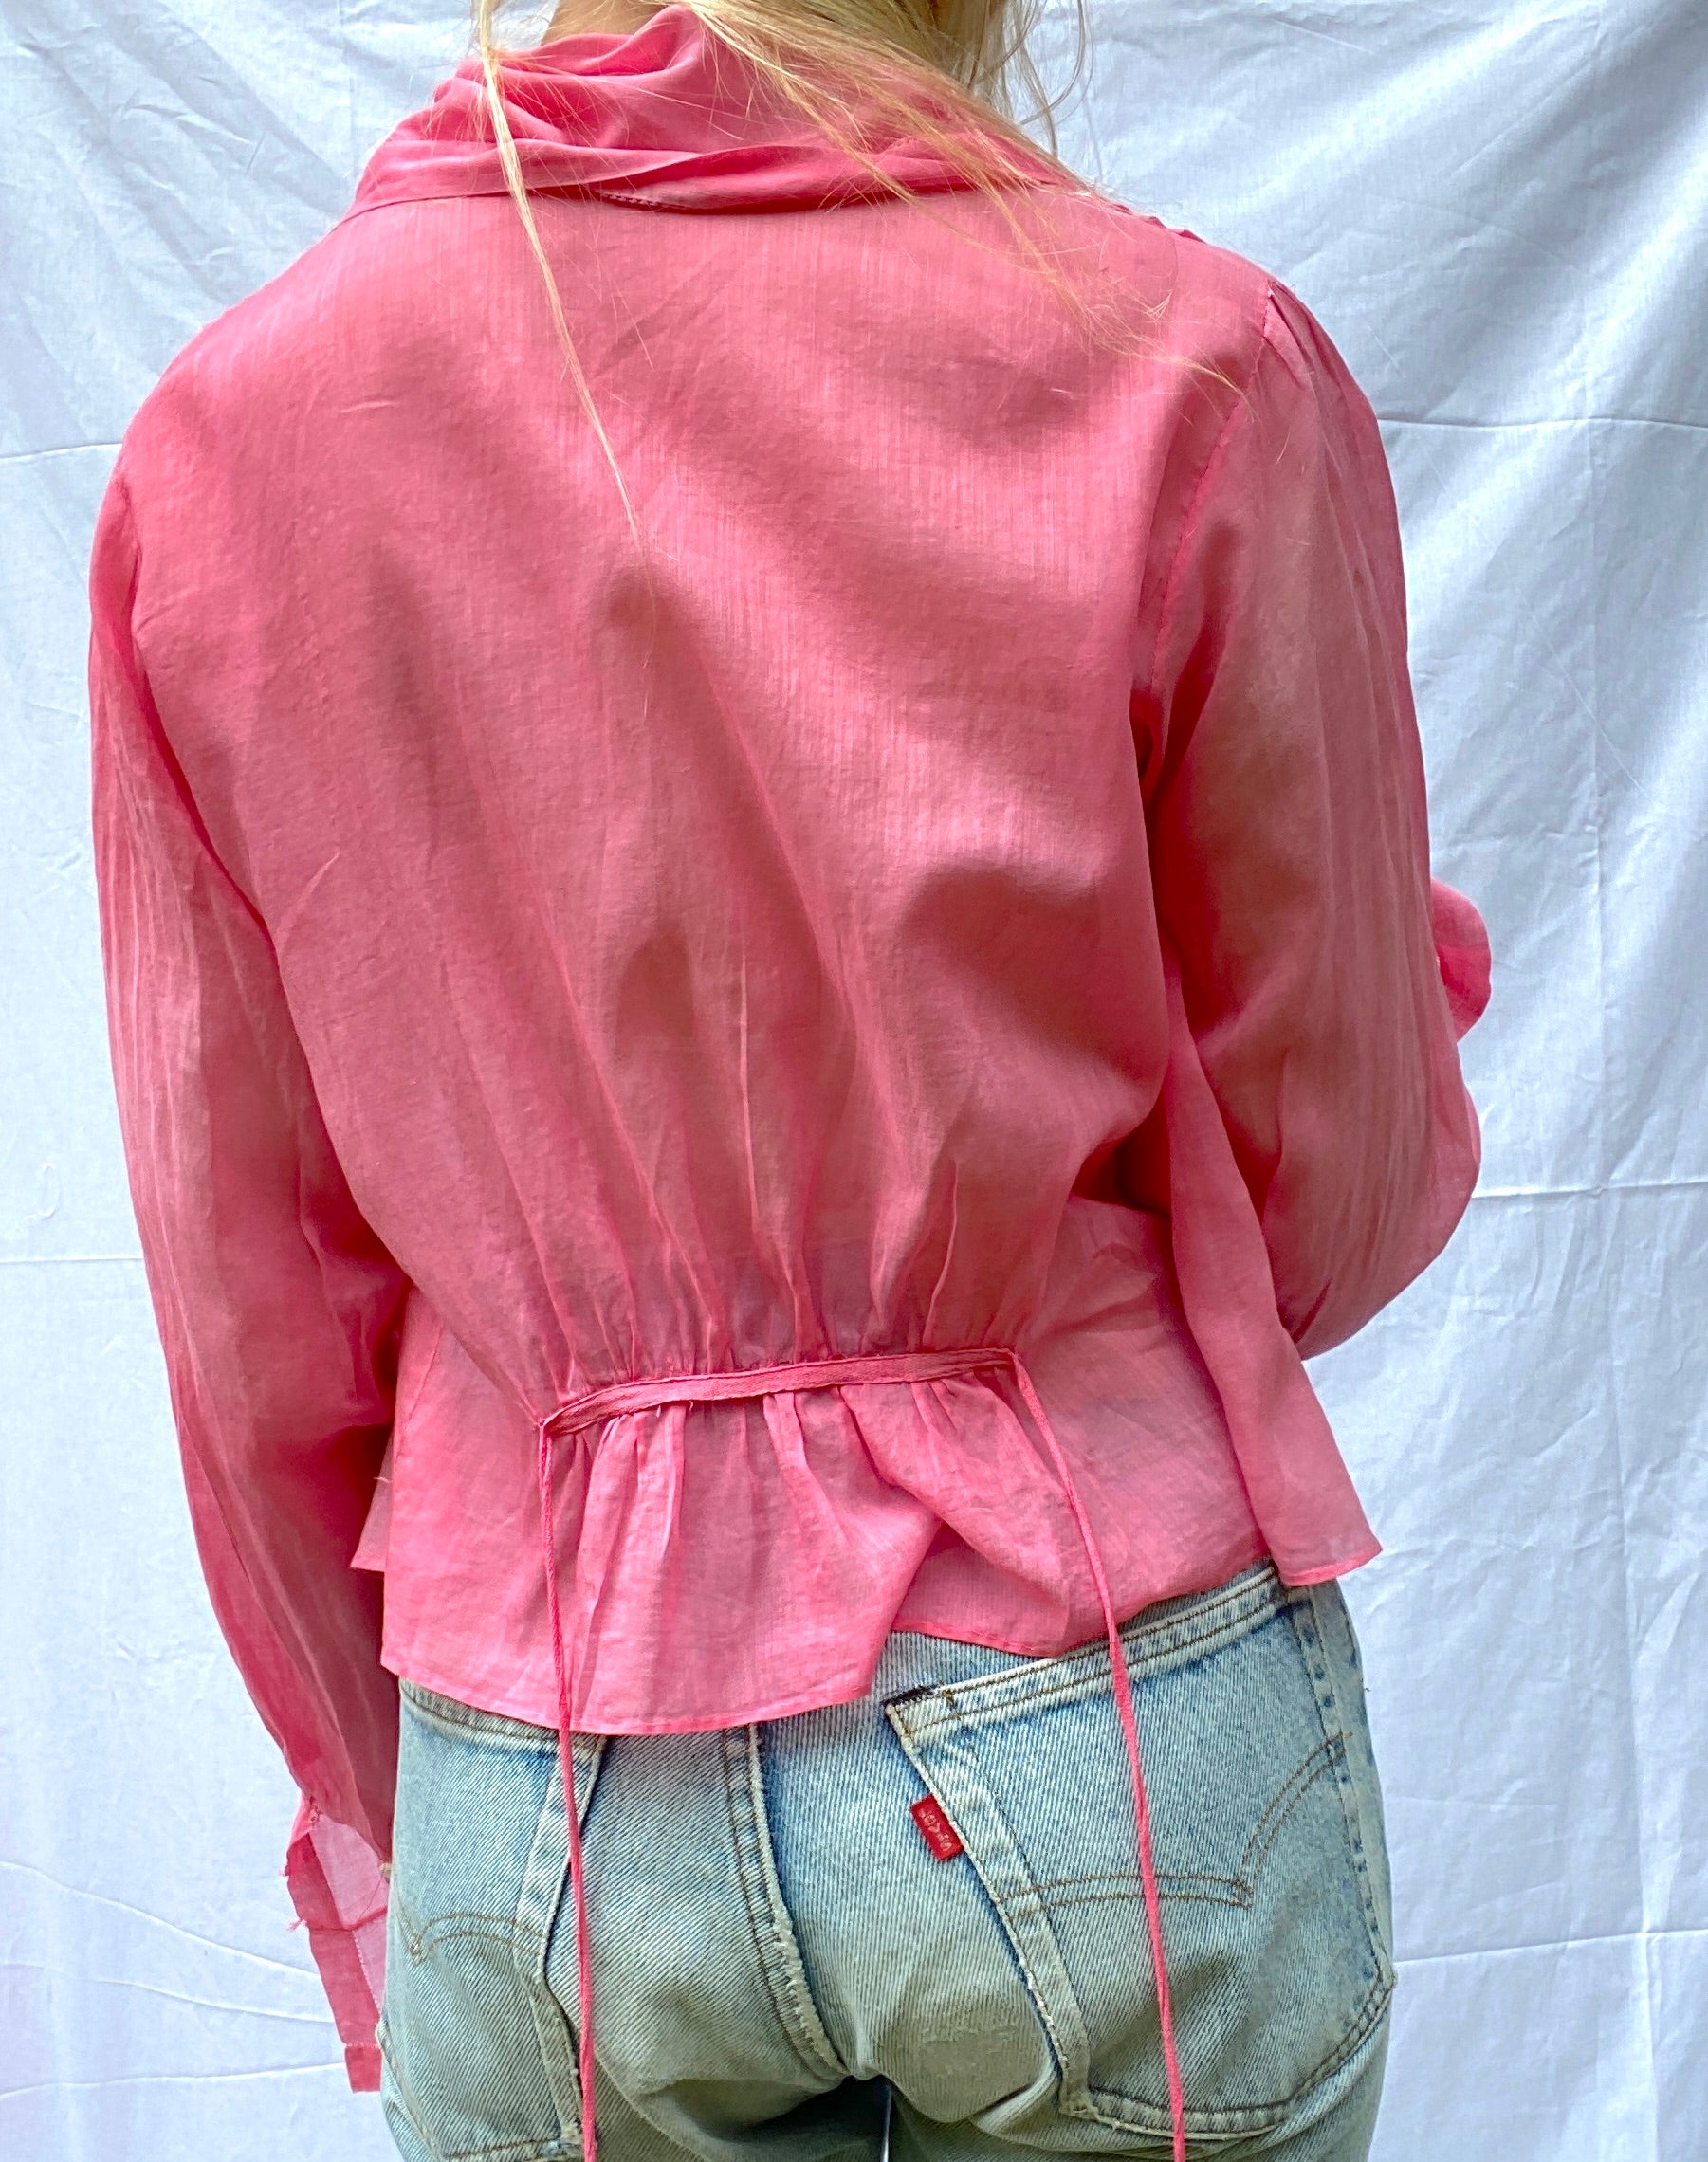 Hand Dyed Cotton Voile Victorian Blouse